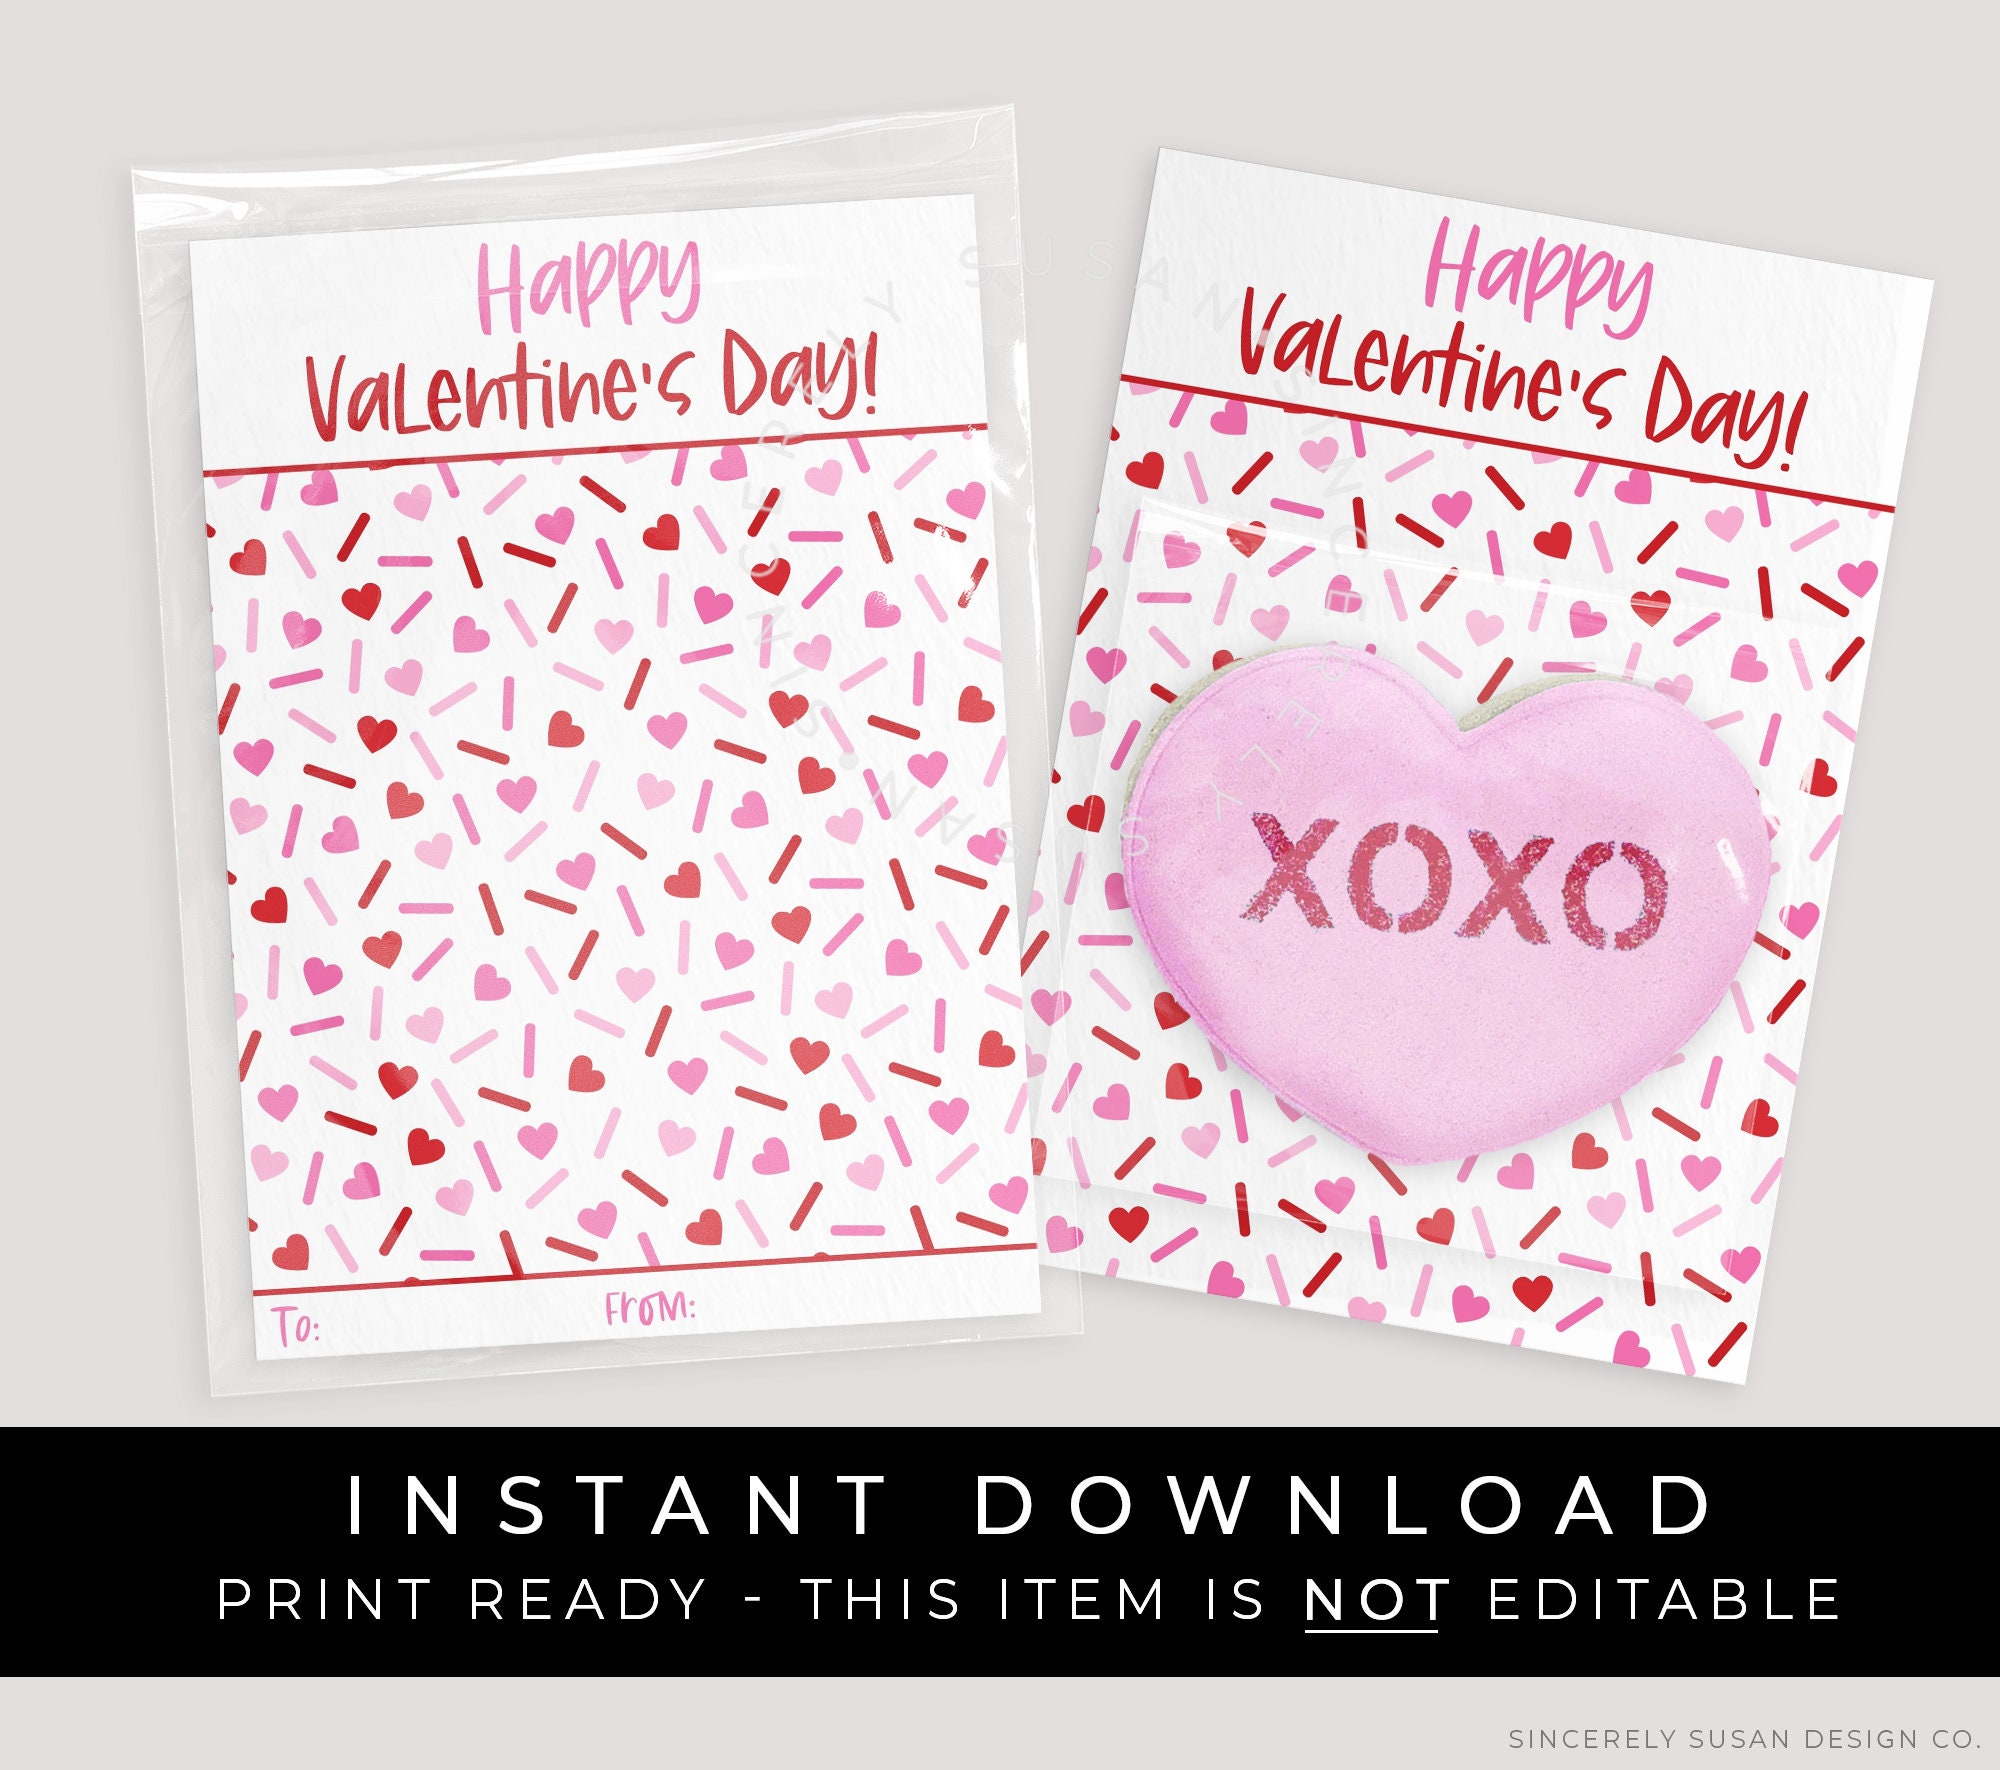 Includes Printable Envelope Template Instant Download Card Printable Love Card 5x7 Digital Card XOXO Heart Card